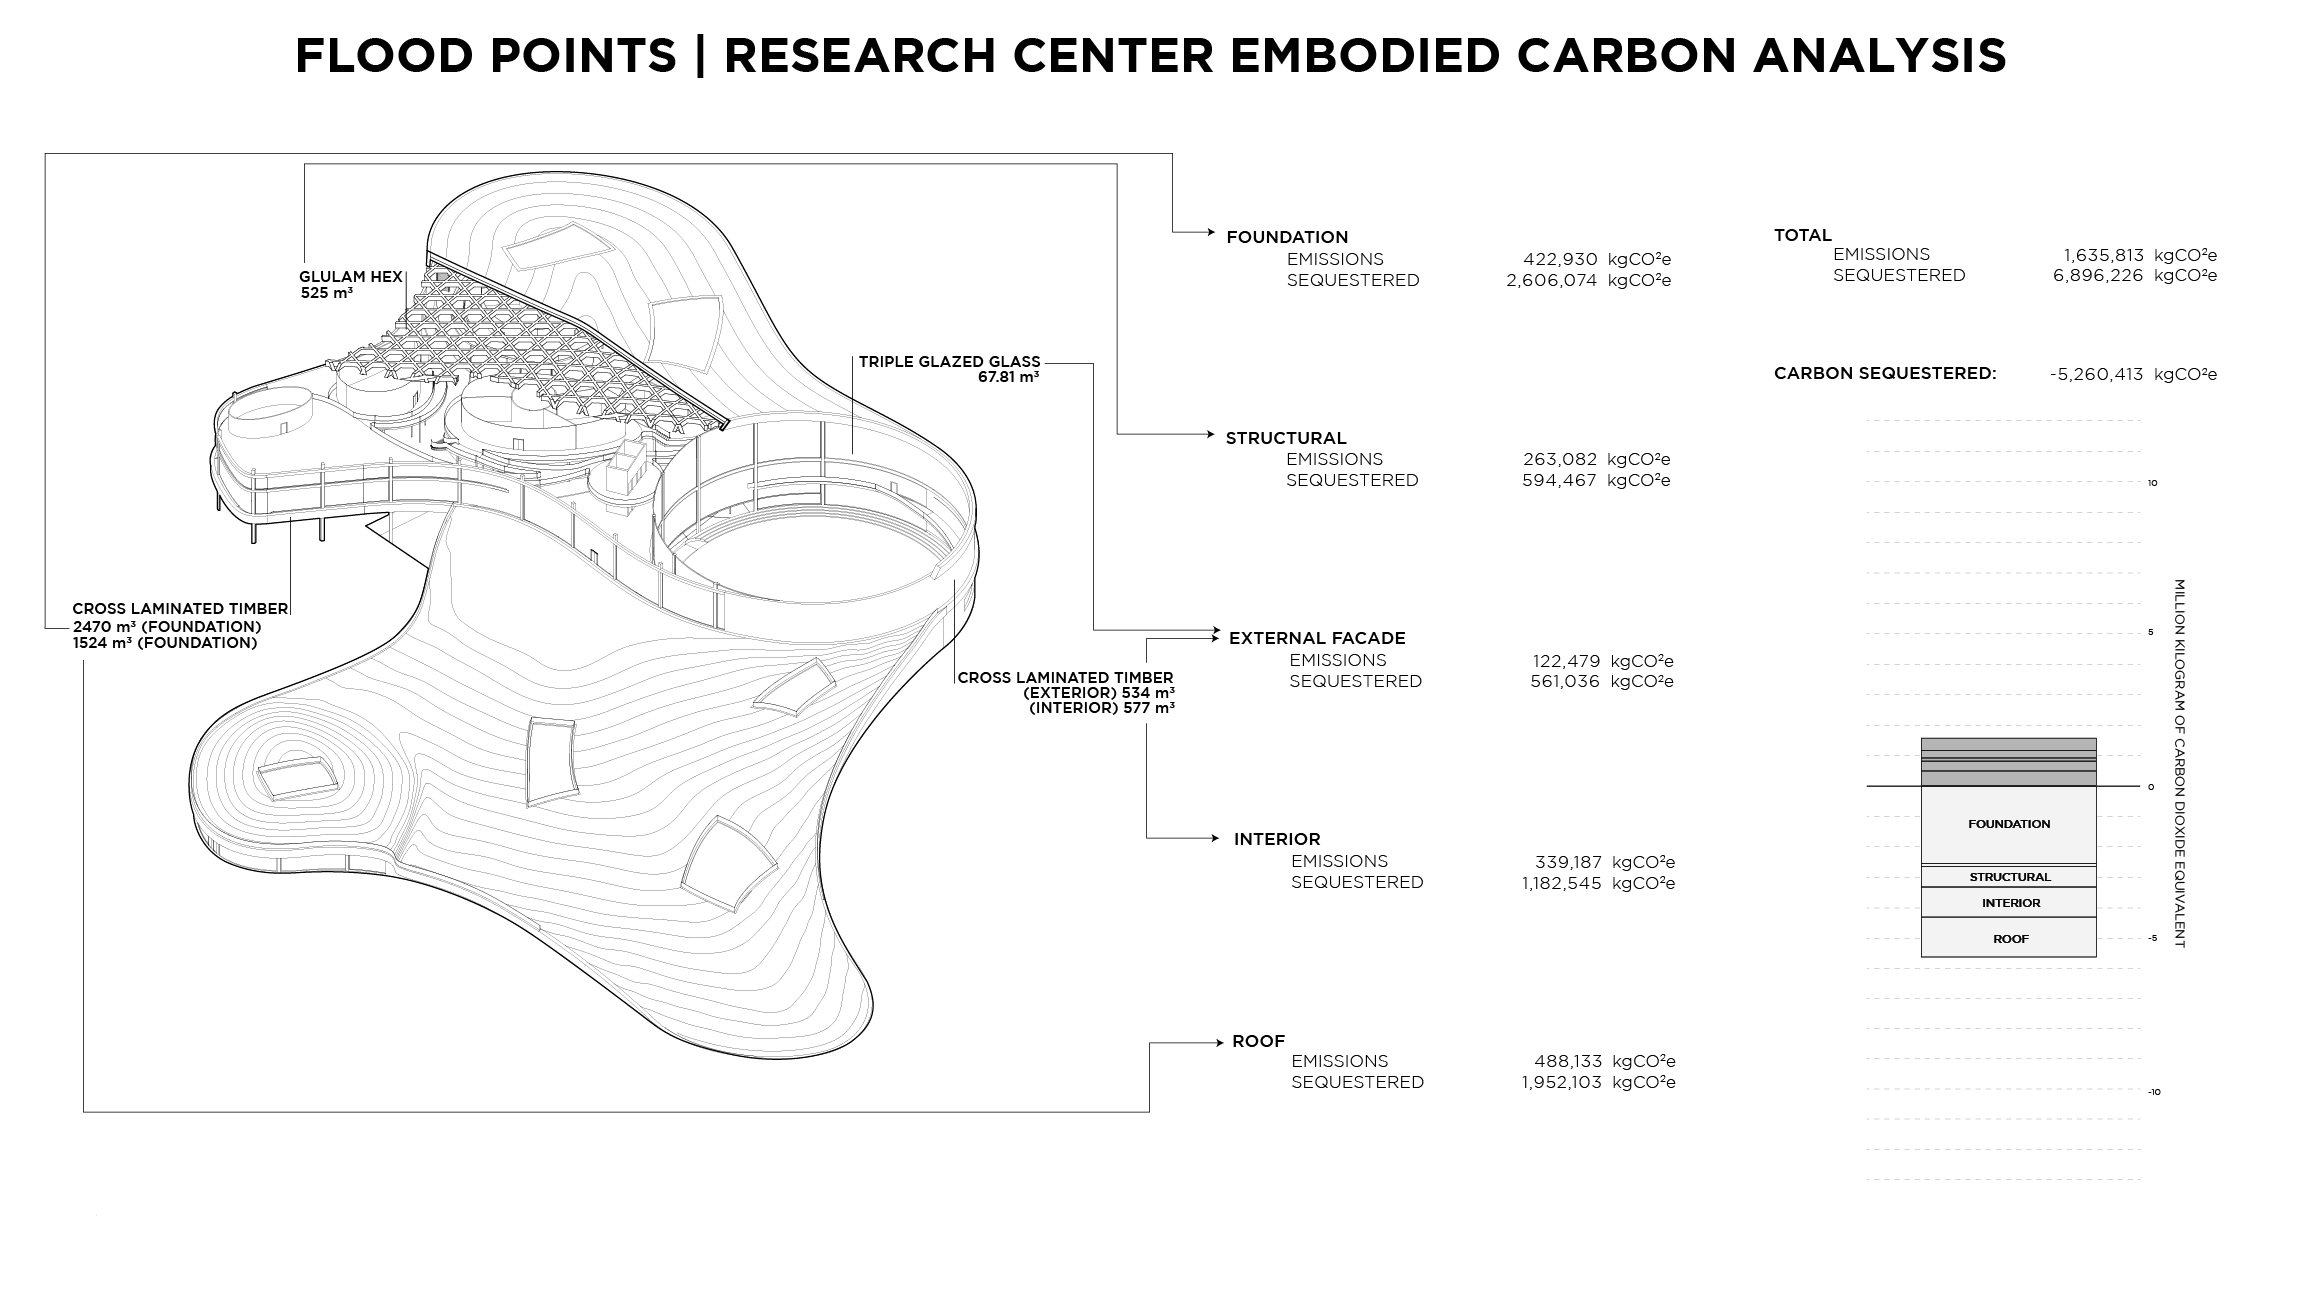 FLOODPOINTS_Research Center Embodied Carbon Analysis.png